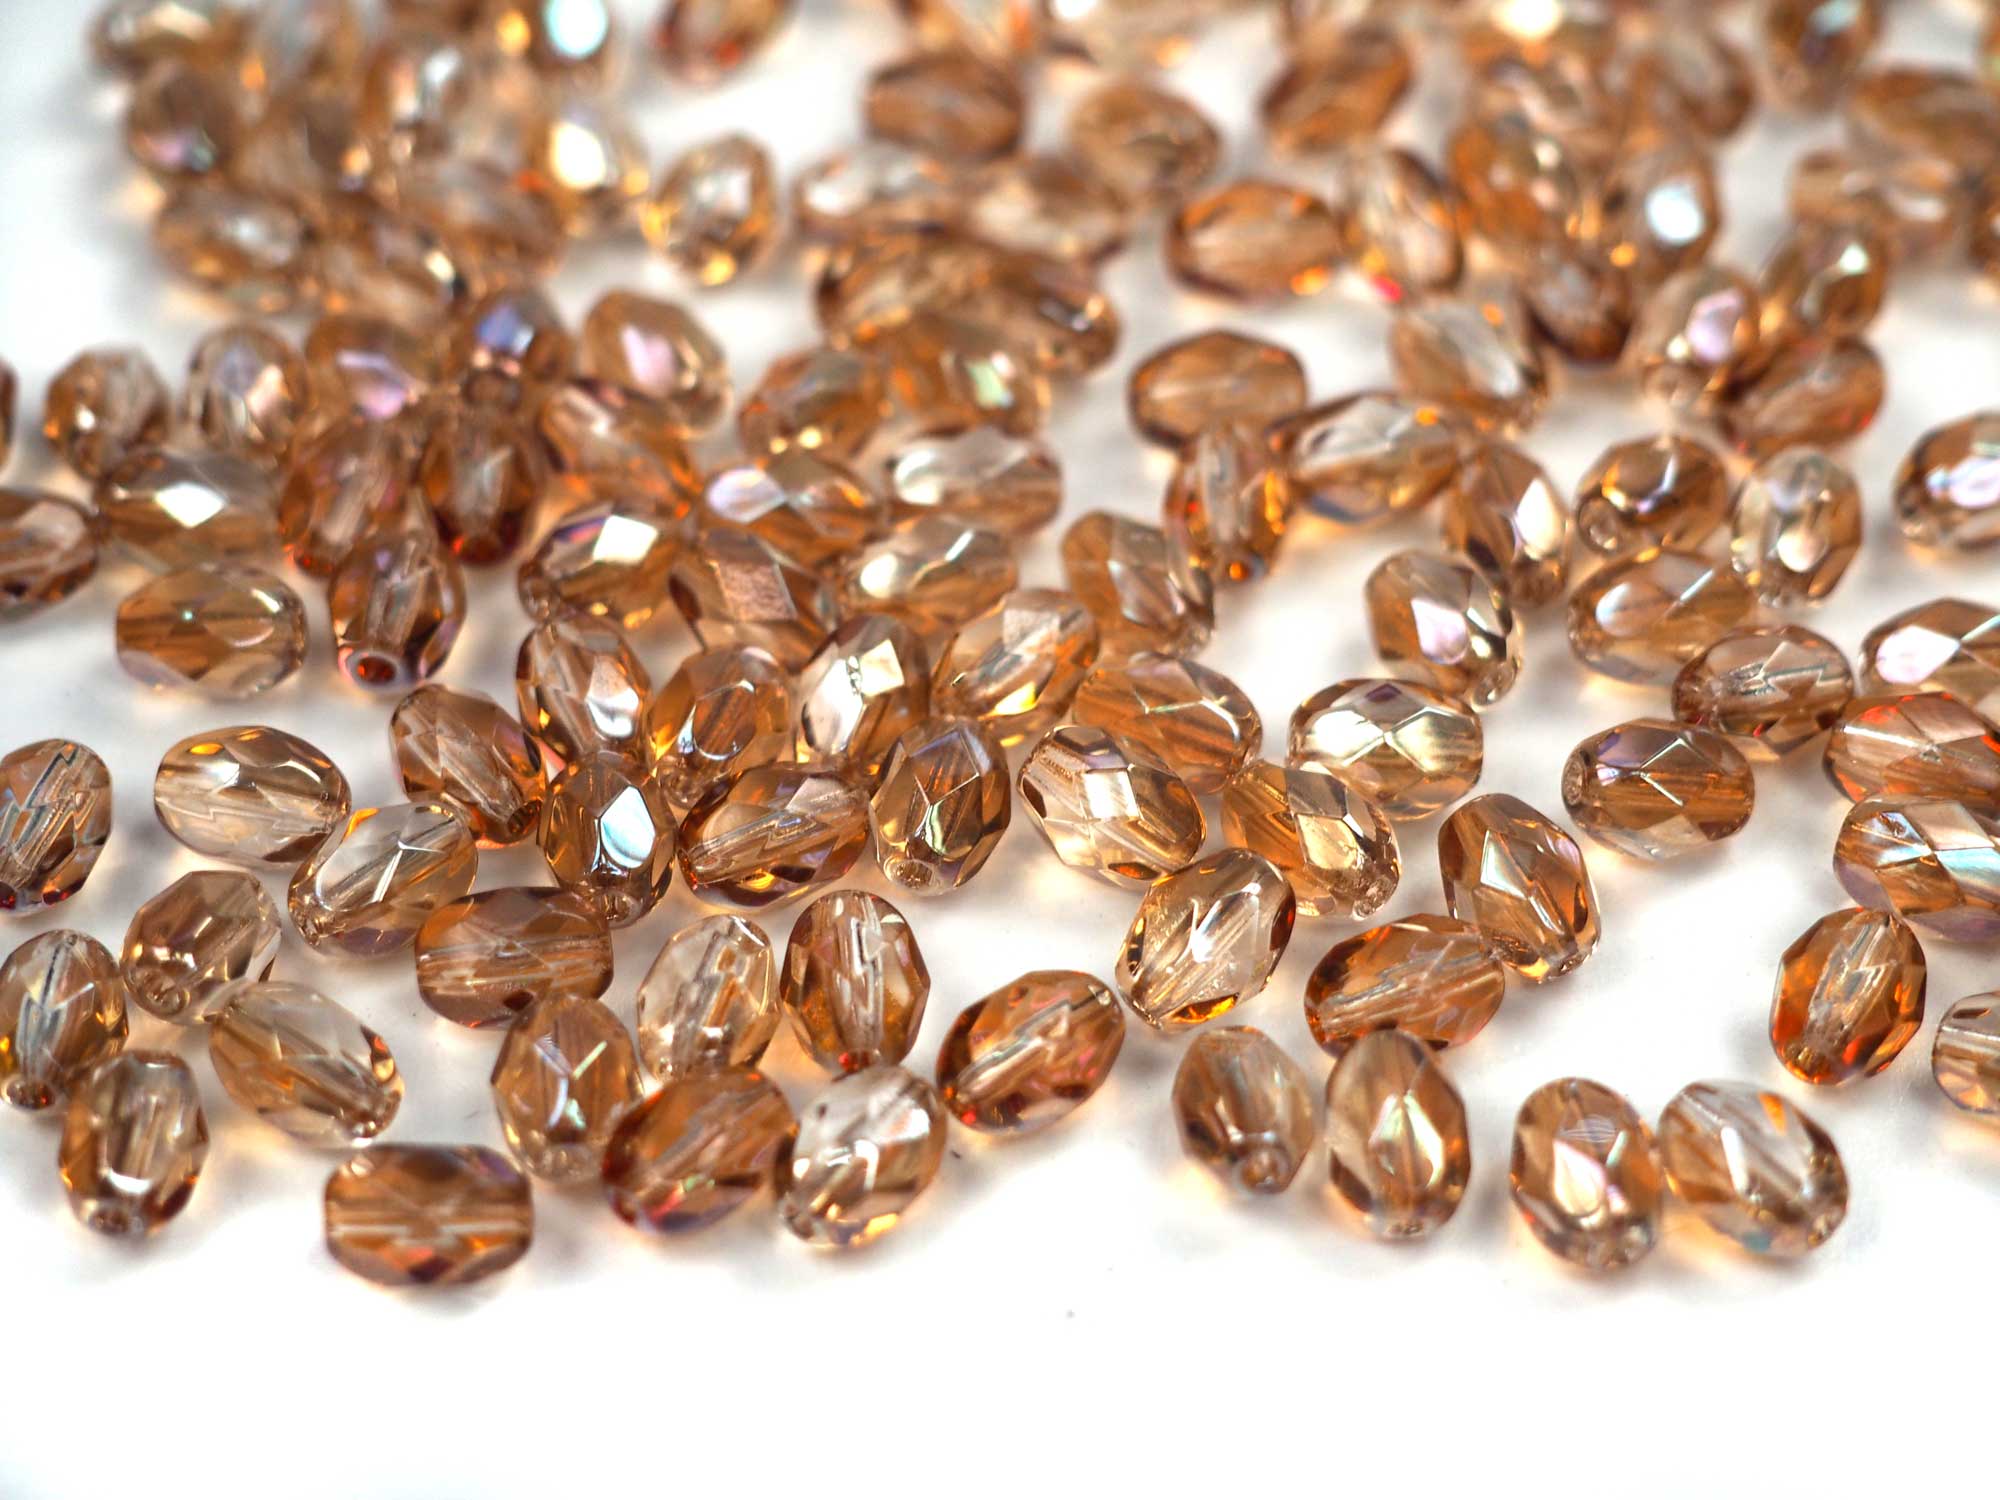 Czech Glass Olive Shaped Faceted Fire Polished Beads 7x5mm Crystal Celsianite coated, 50 pieces, P864